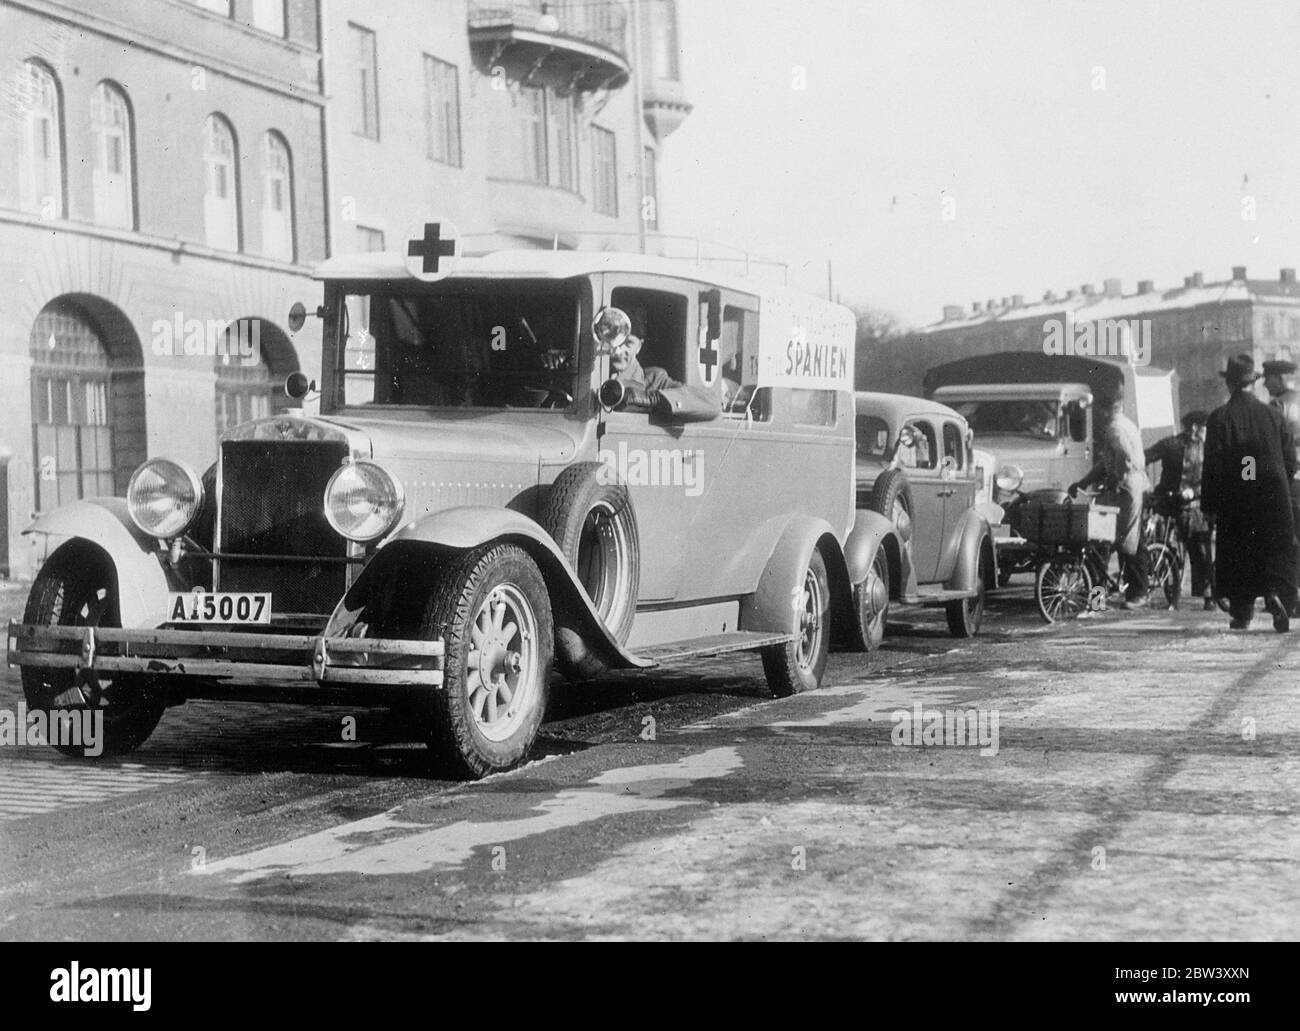 Swedish , Norwegian field hospitals Chiefs leave Stockholm for Spain . Captain B H Natt och Dag , Superintendent of the Swedish - Norwegian Field Hospital for Spain and Dr Nils Silverskiold , the Chief Surgeon , left Stockholm with three vehicles , for the Spanish civil war zone . Photo shows , three of the vehicles belonging to the Swedish section of the hospital leaving Stockholm for Spain . They were shipped from Gothenburg . Stock Photo